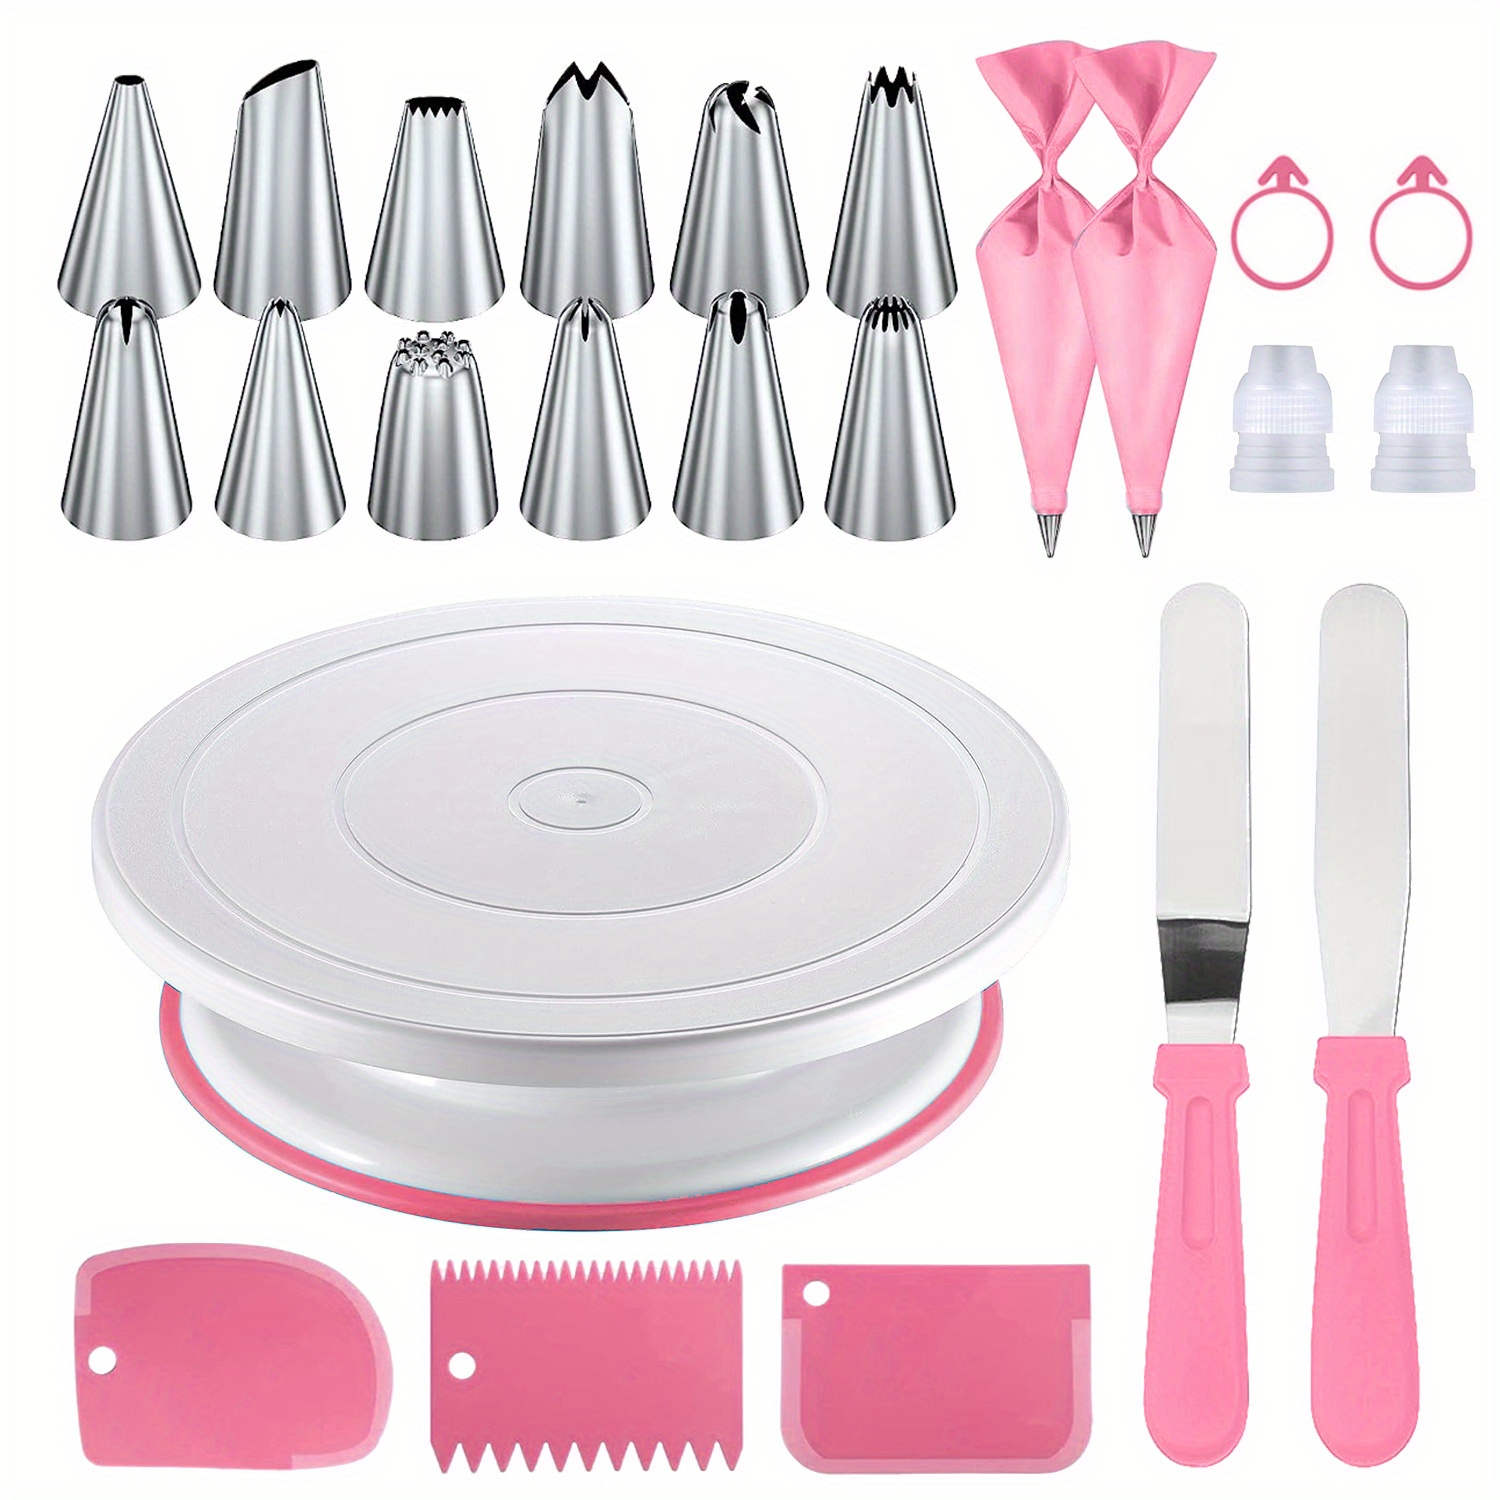 Cake Turntable for Decorating - Cake Decoration Kit with Rotating Cake Stand and Cake Icing Tools - Cake Smoother, Icing Spatulas, Cake Board, eBook W